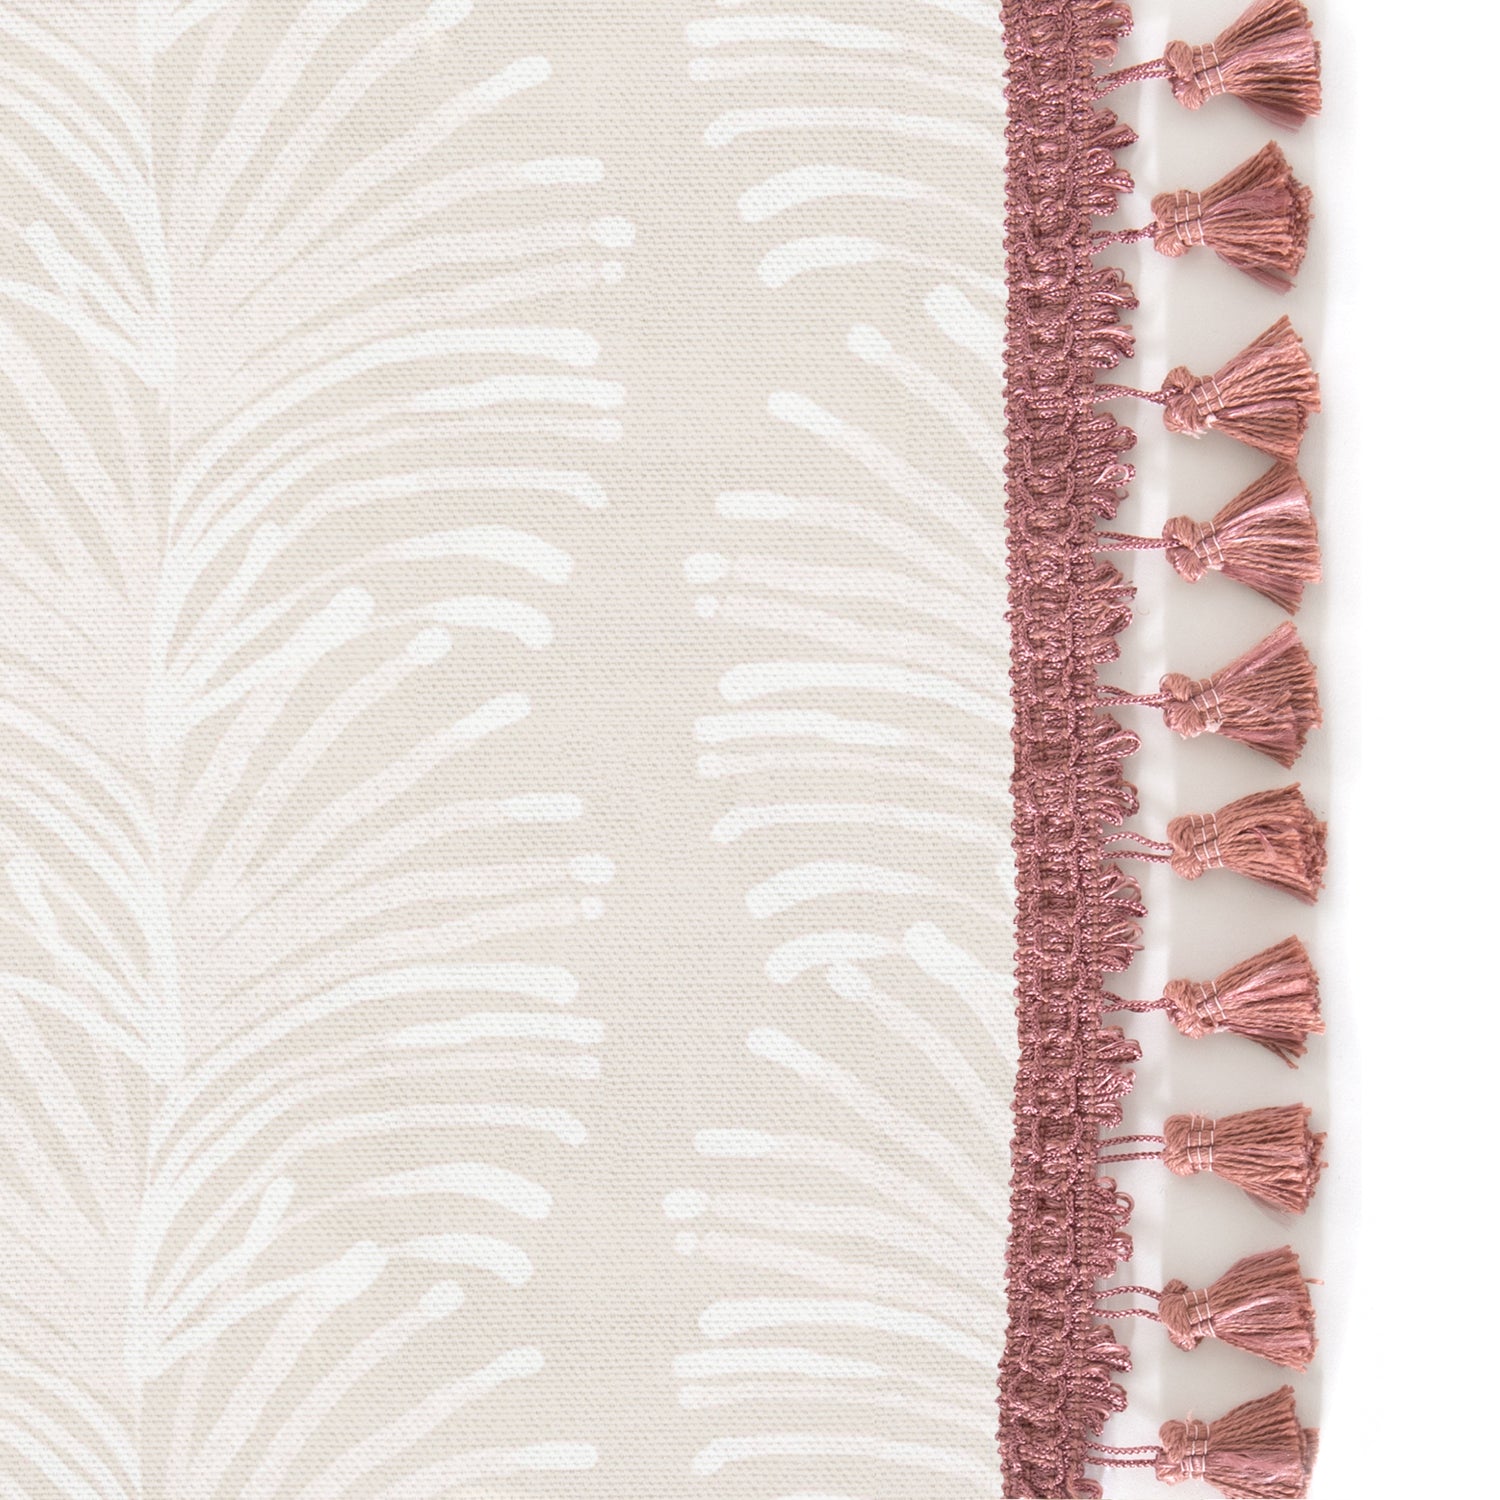 Upclose picture of Emma Sand custom Beige Botanical Stripecurtain with dusty rose tassel trim